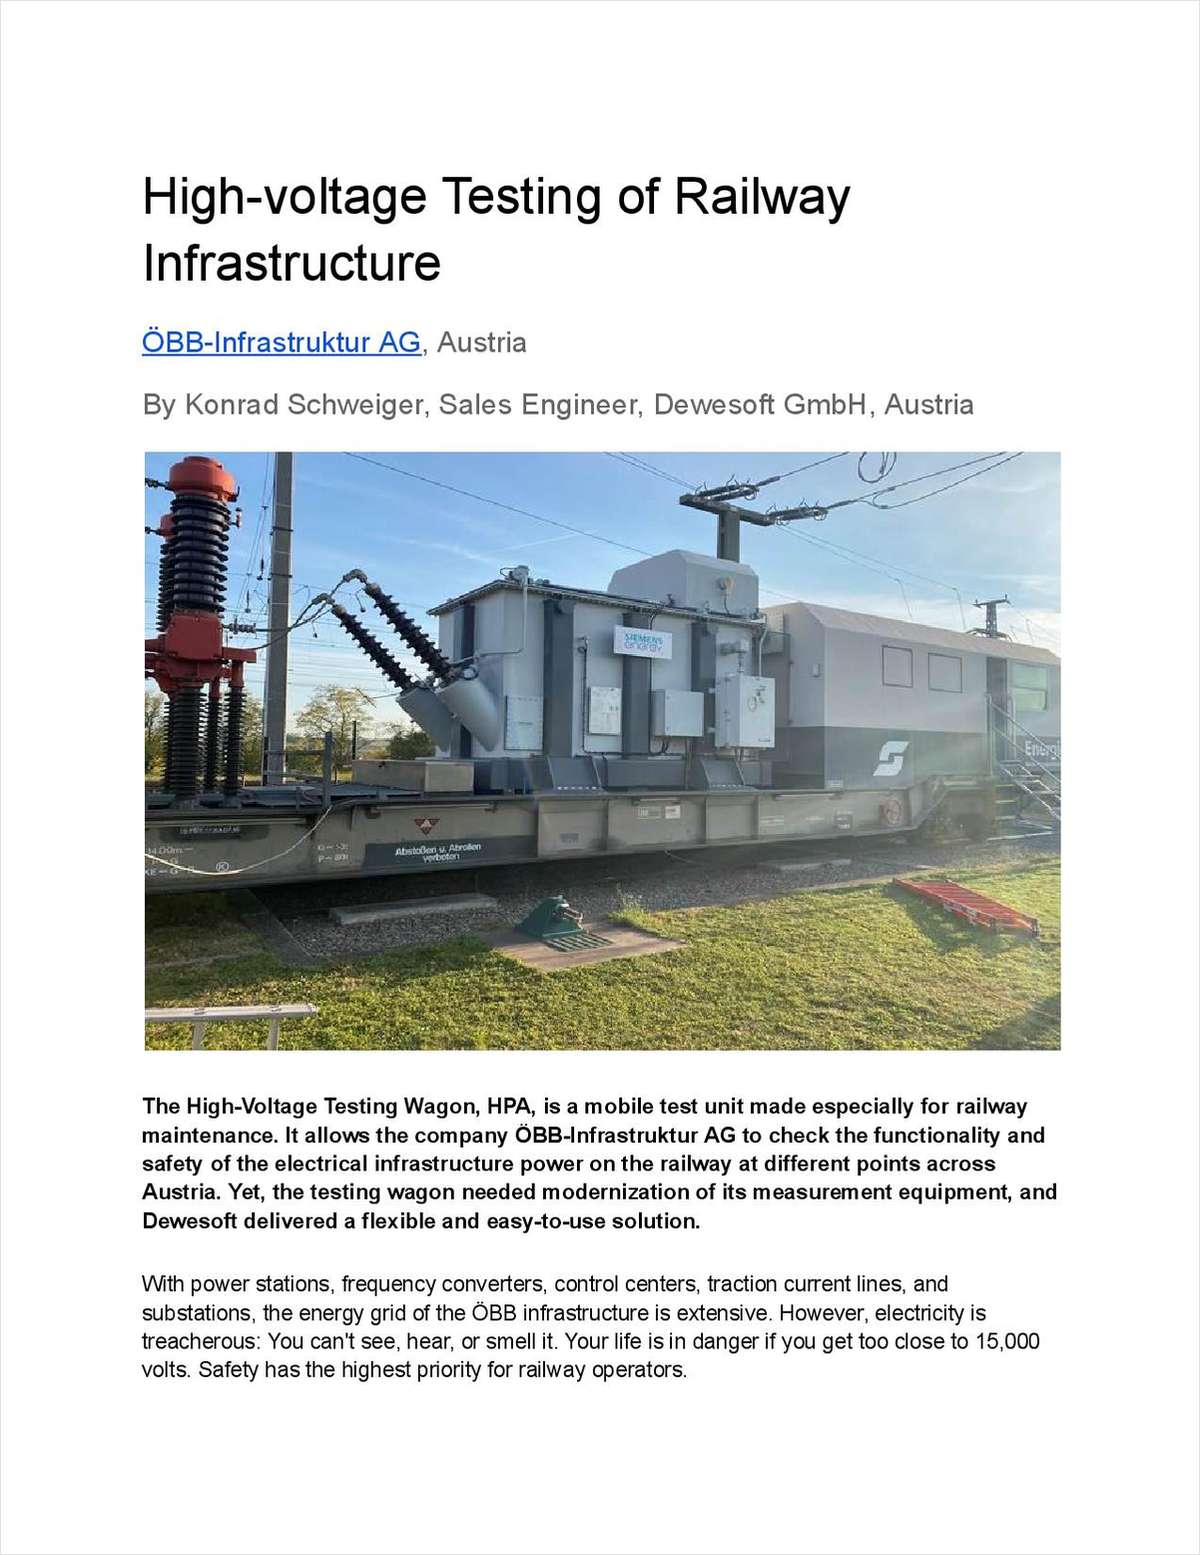 High-Voltage Testing of Railway Infrastructure